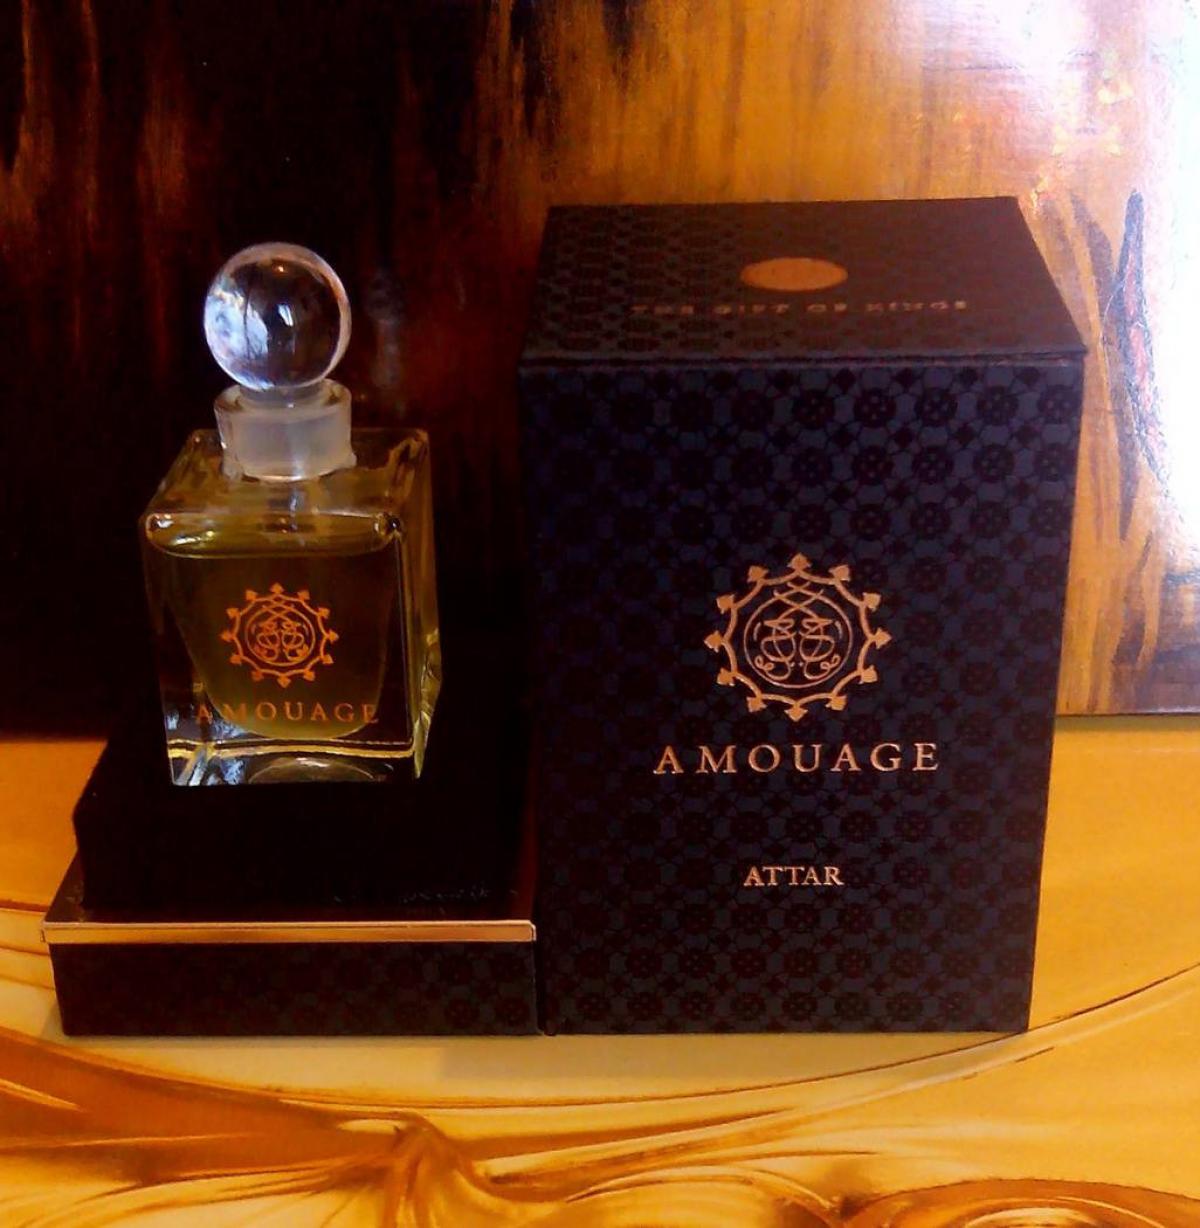 Sandal Amouage perfume - a fragrance for women and men